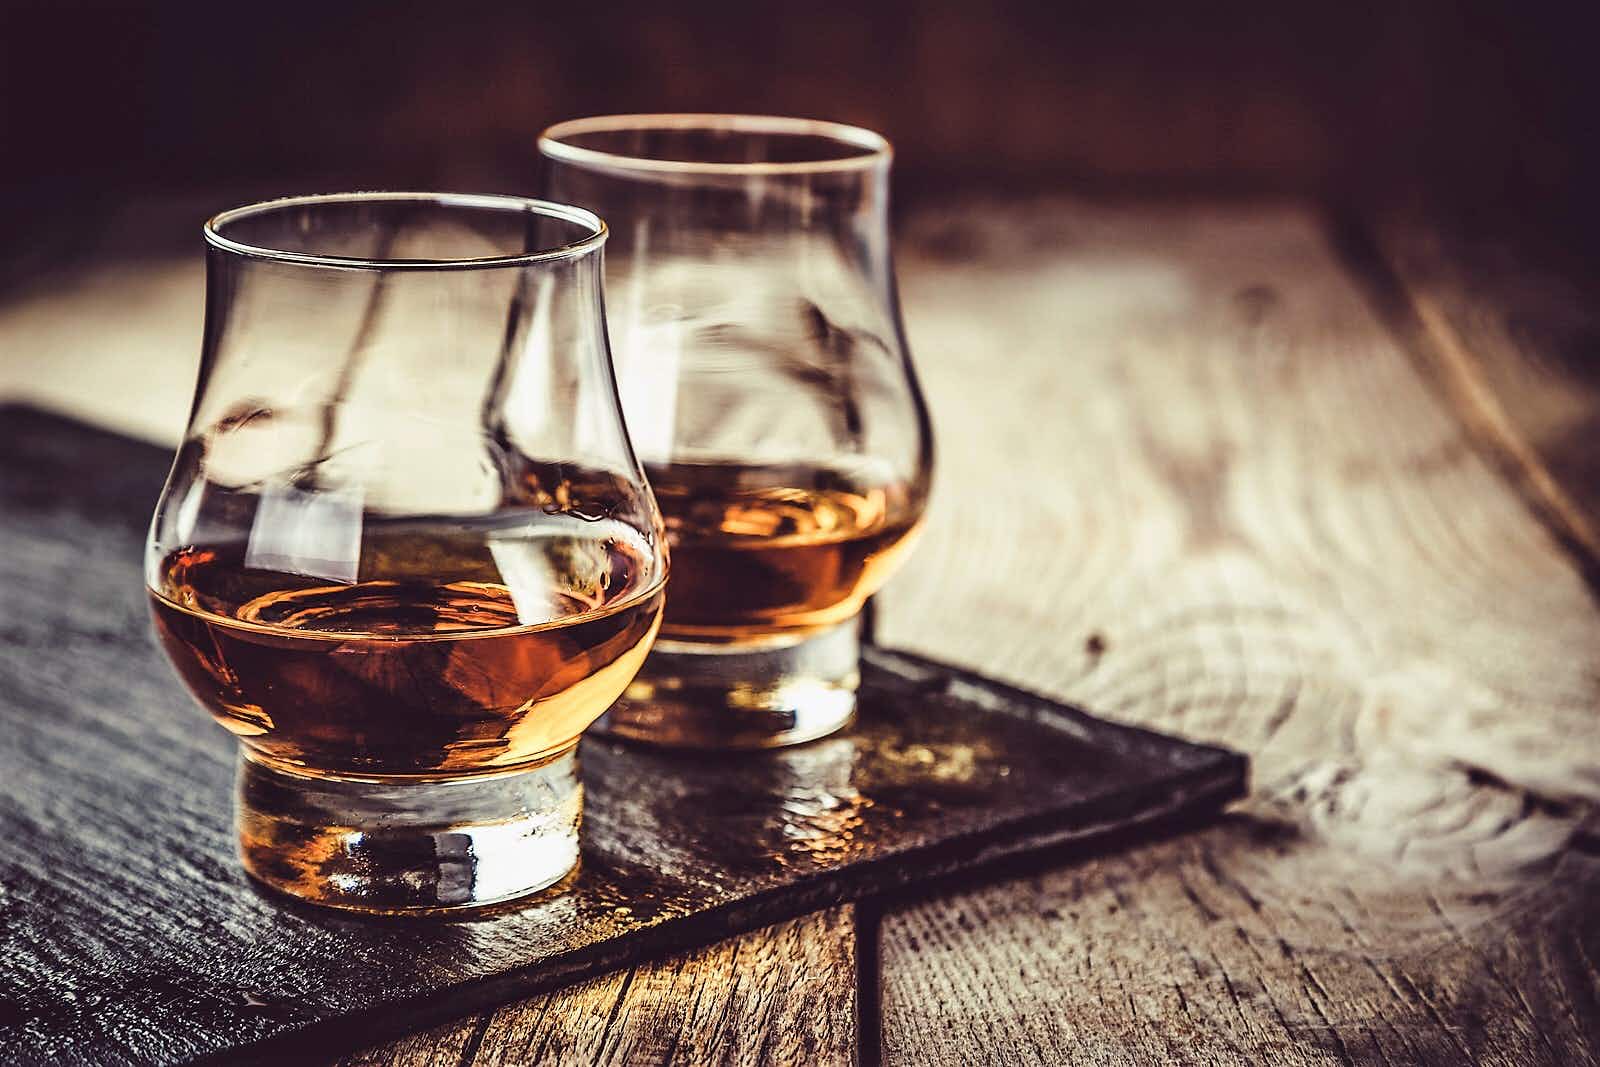 Close up shot of two glasses of whiskey set on a wooden table